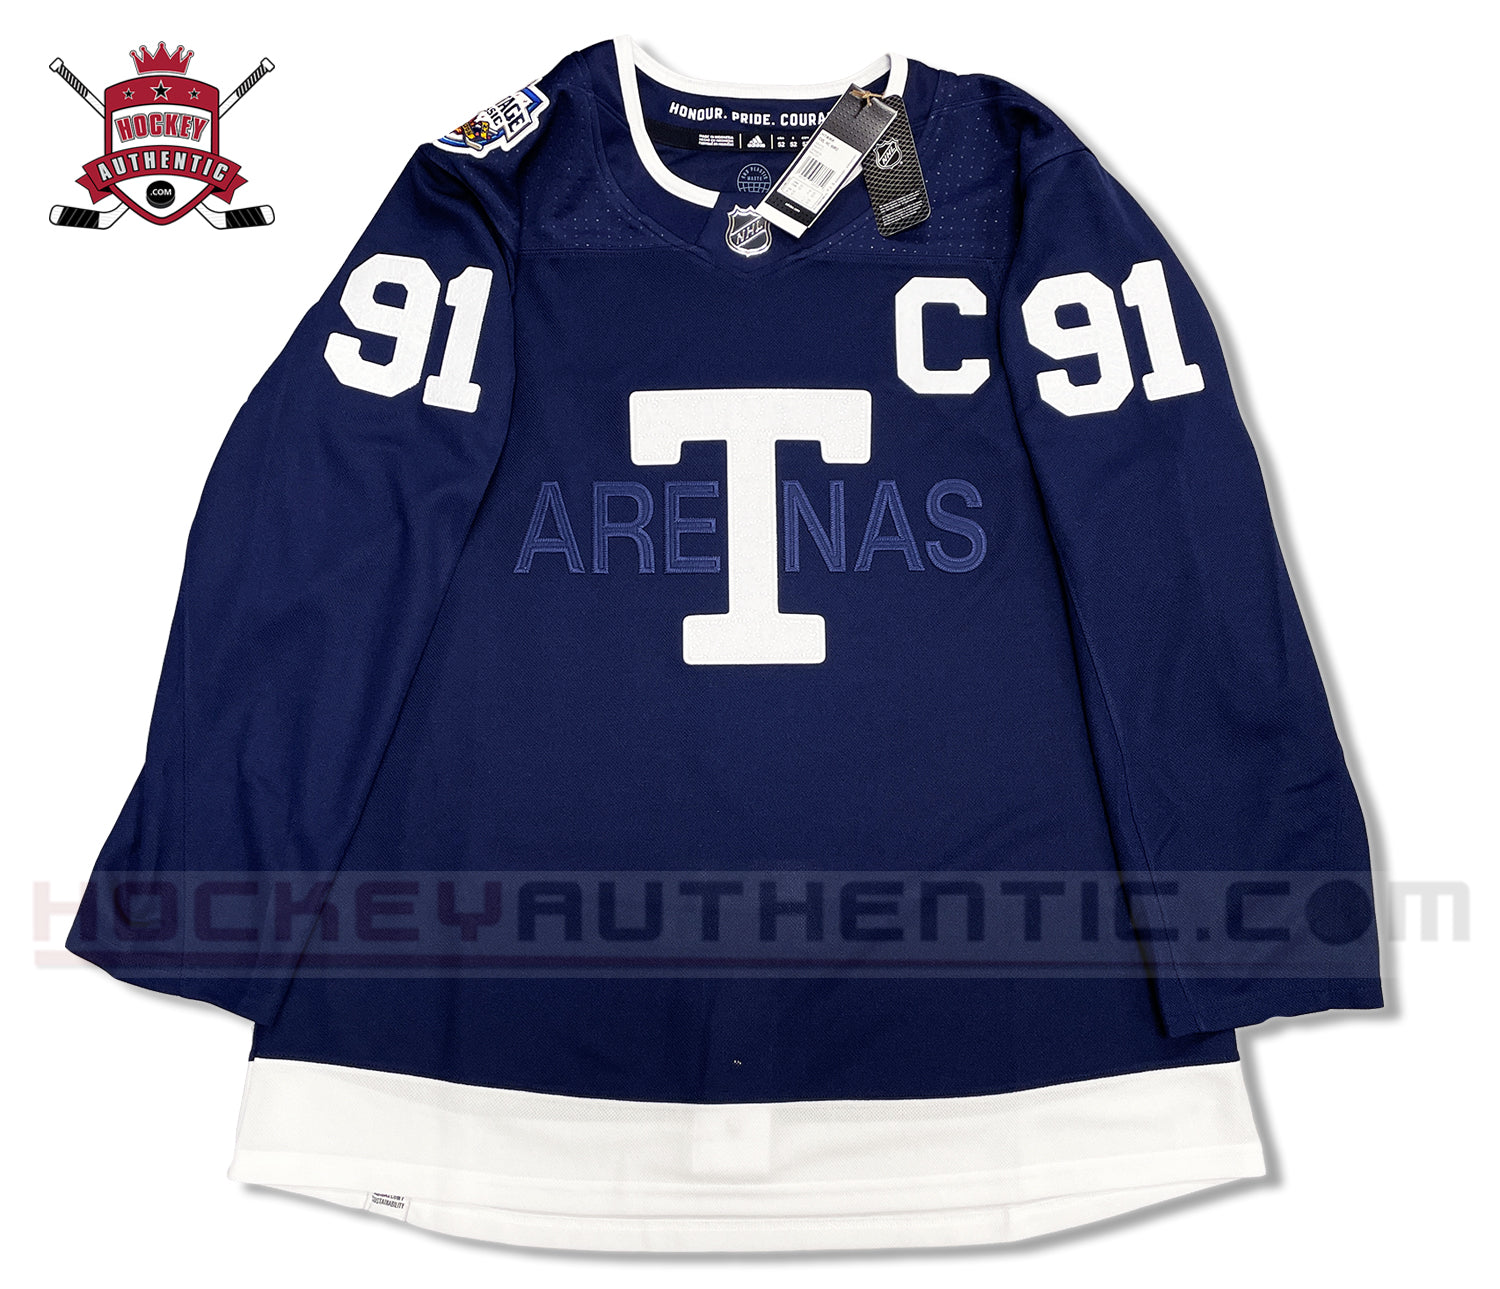 NHL Jersey Toronto Maple Leafs Heritage Classic Limited MARNER